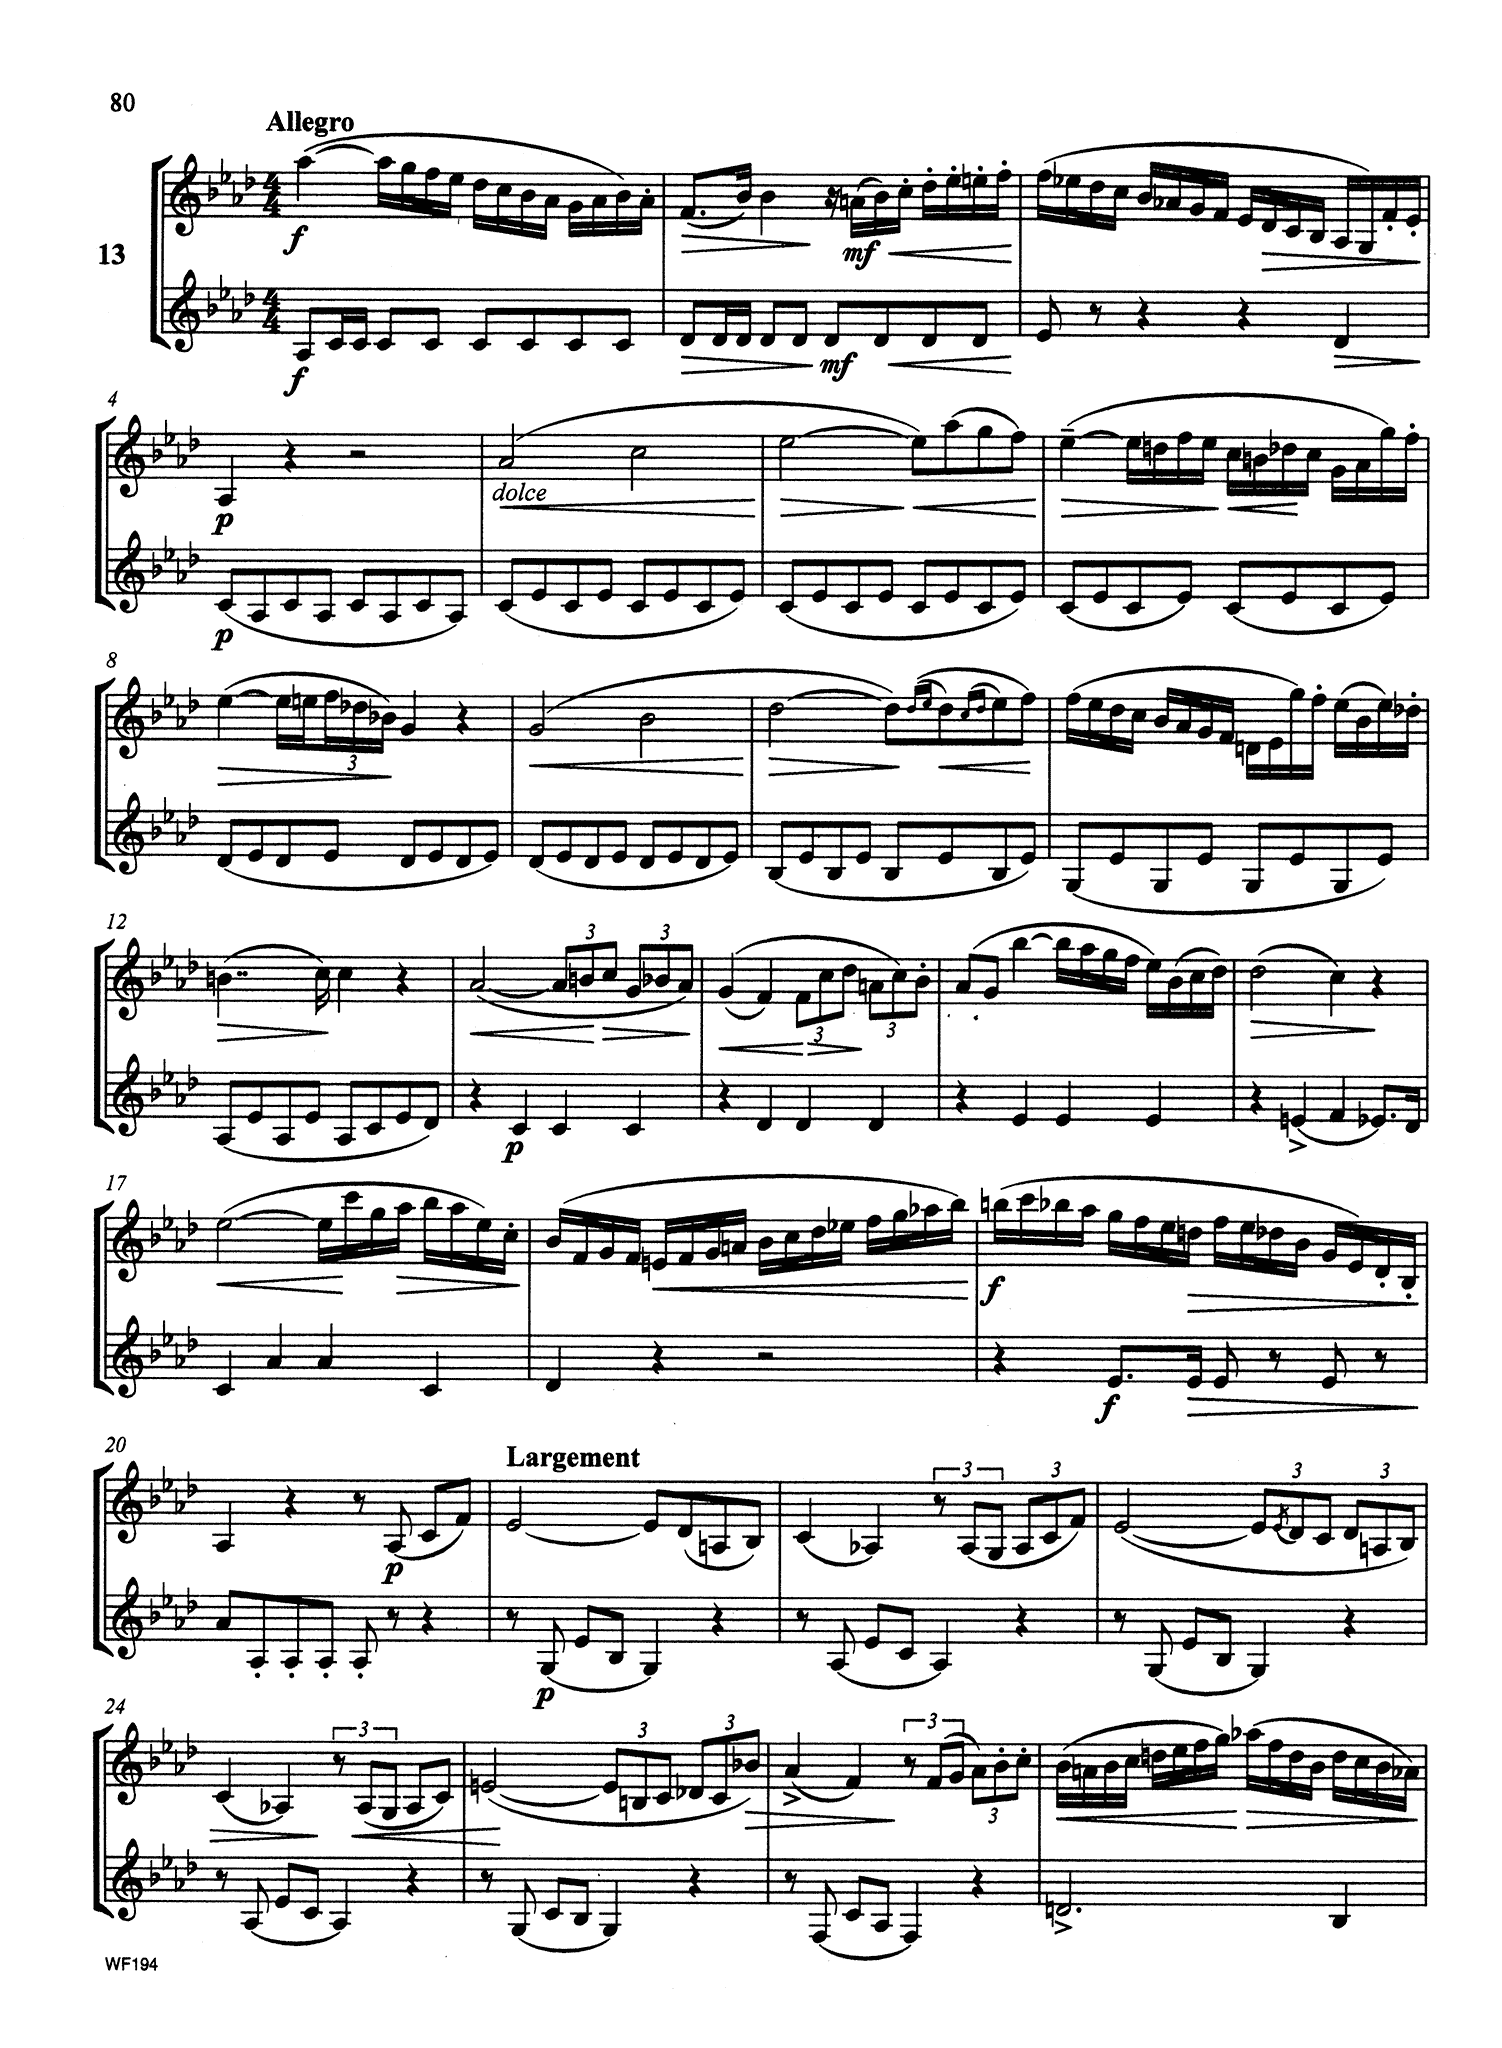 15 Grand Duets Page 80